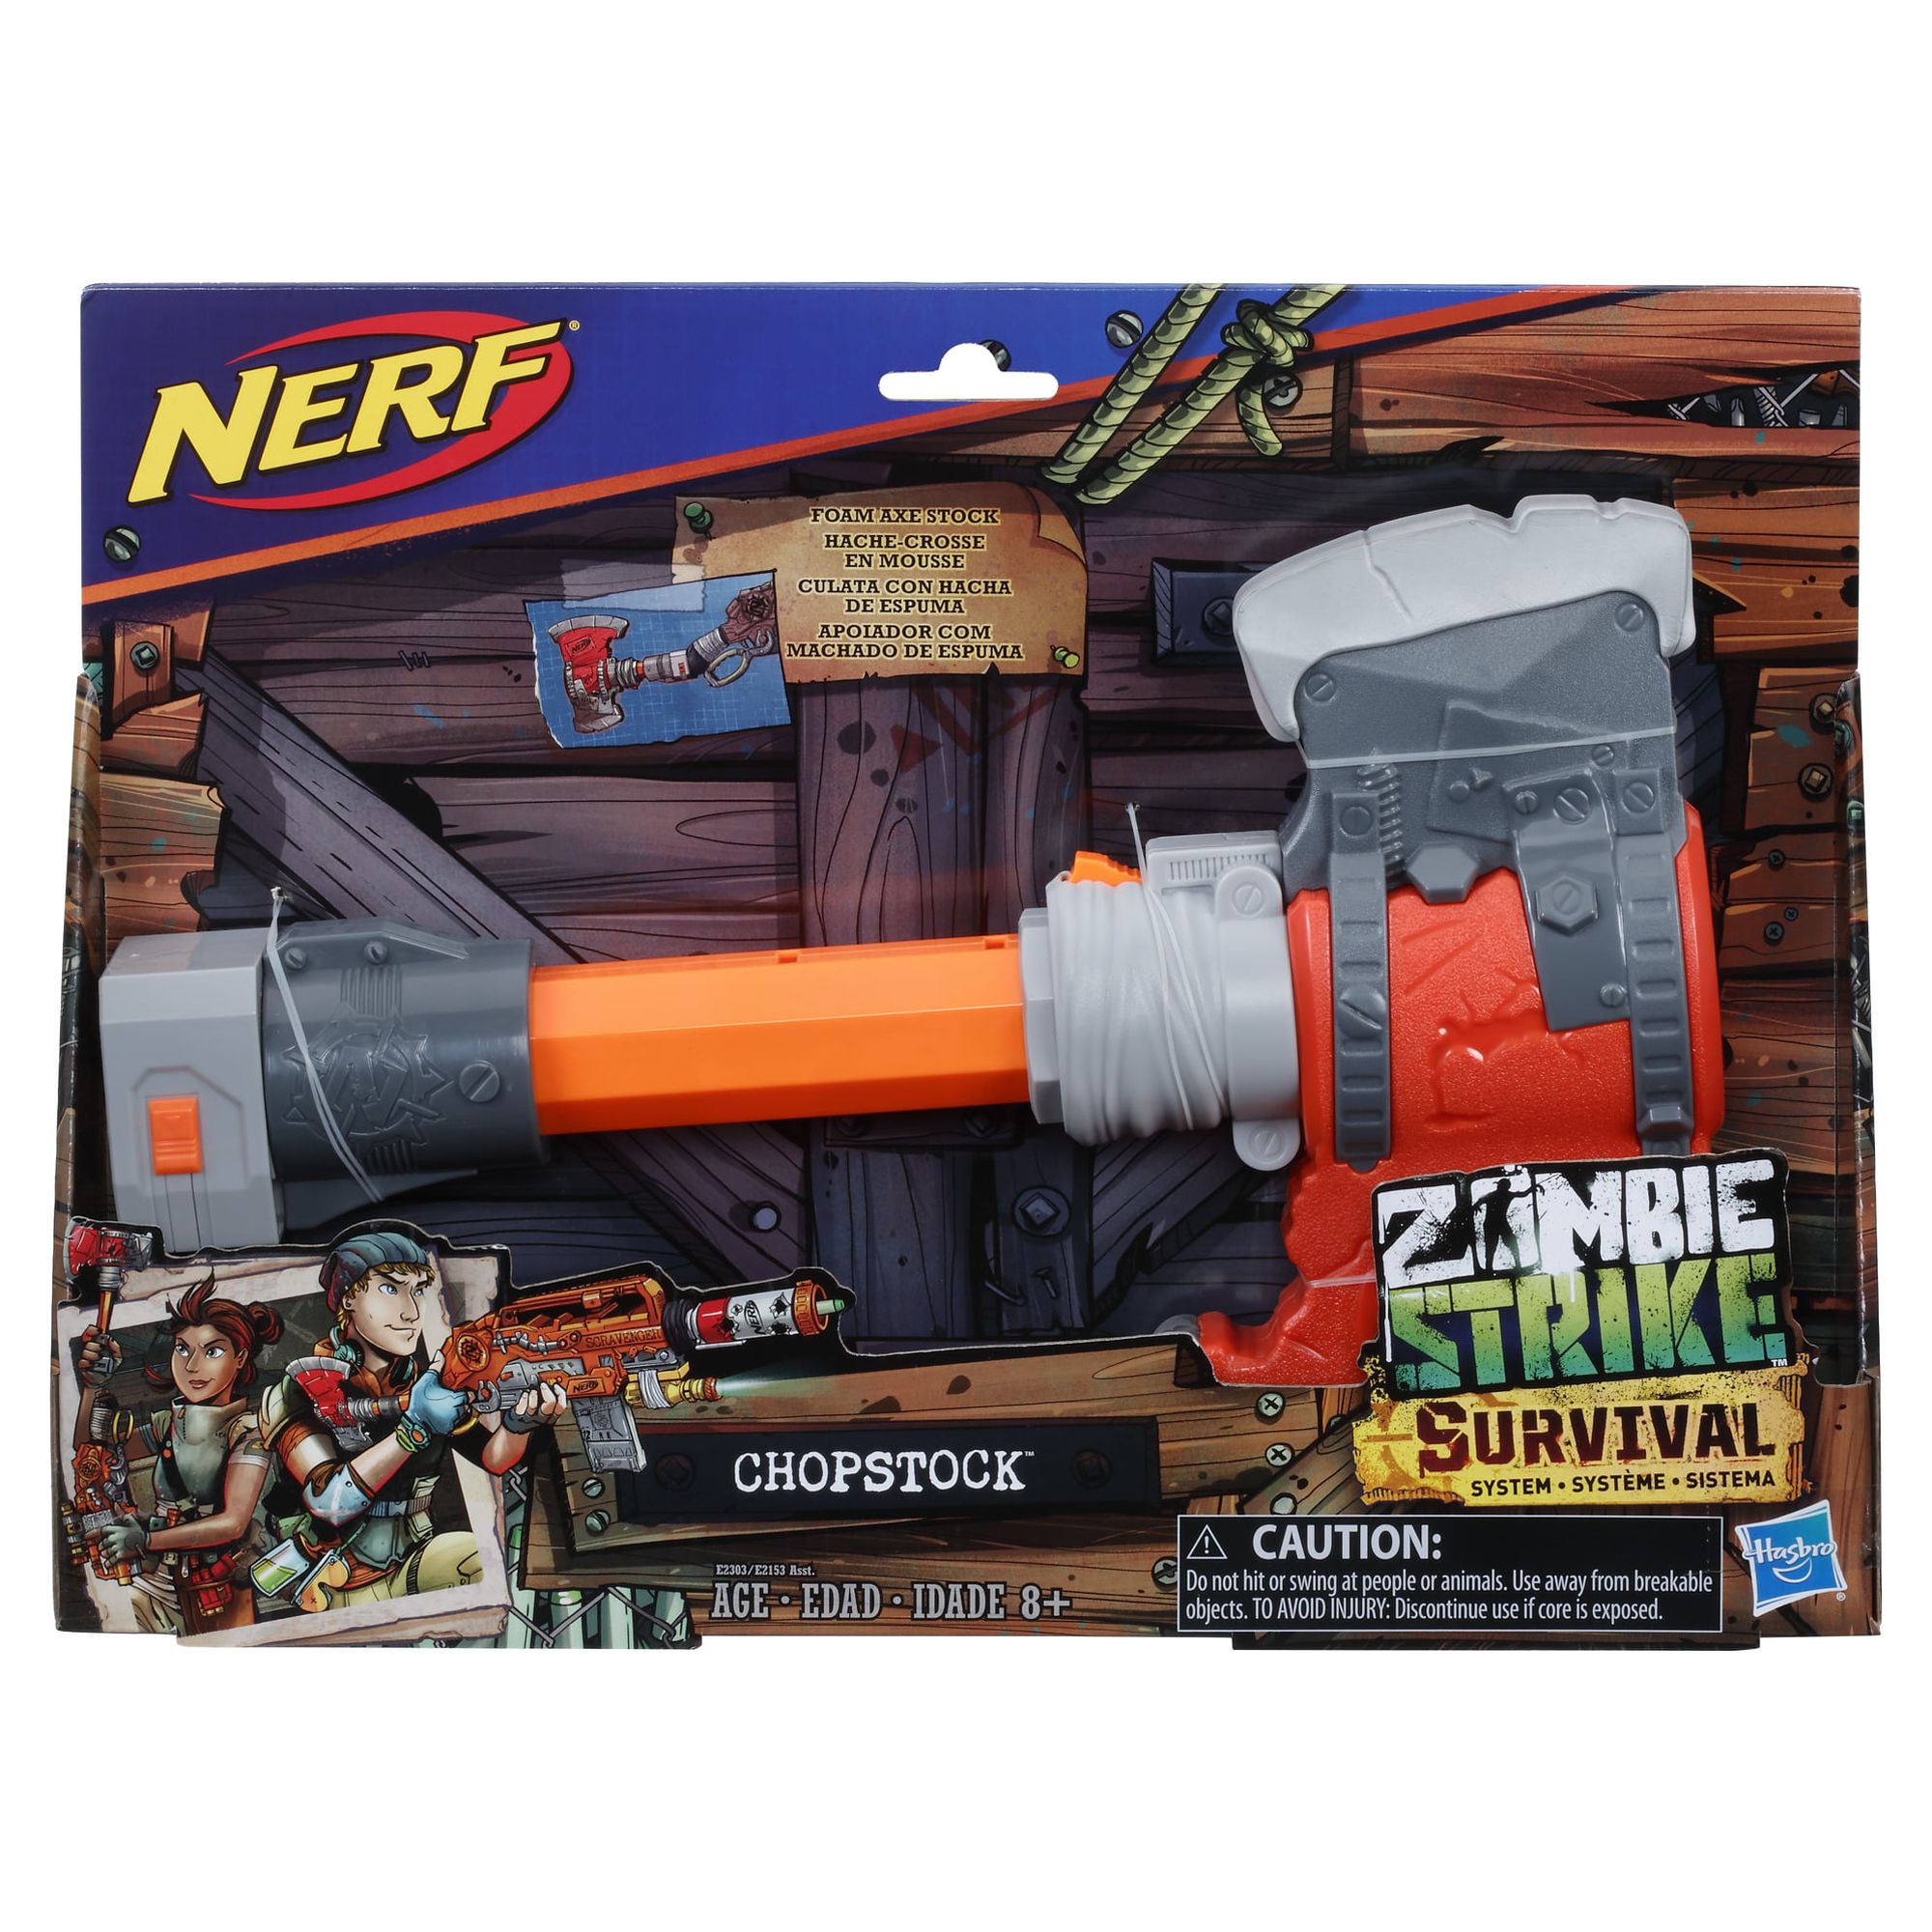 Nerf Zombie Strike Survival System Chopstock, Ages 8 and Up - image 2 of 3